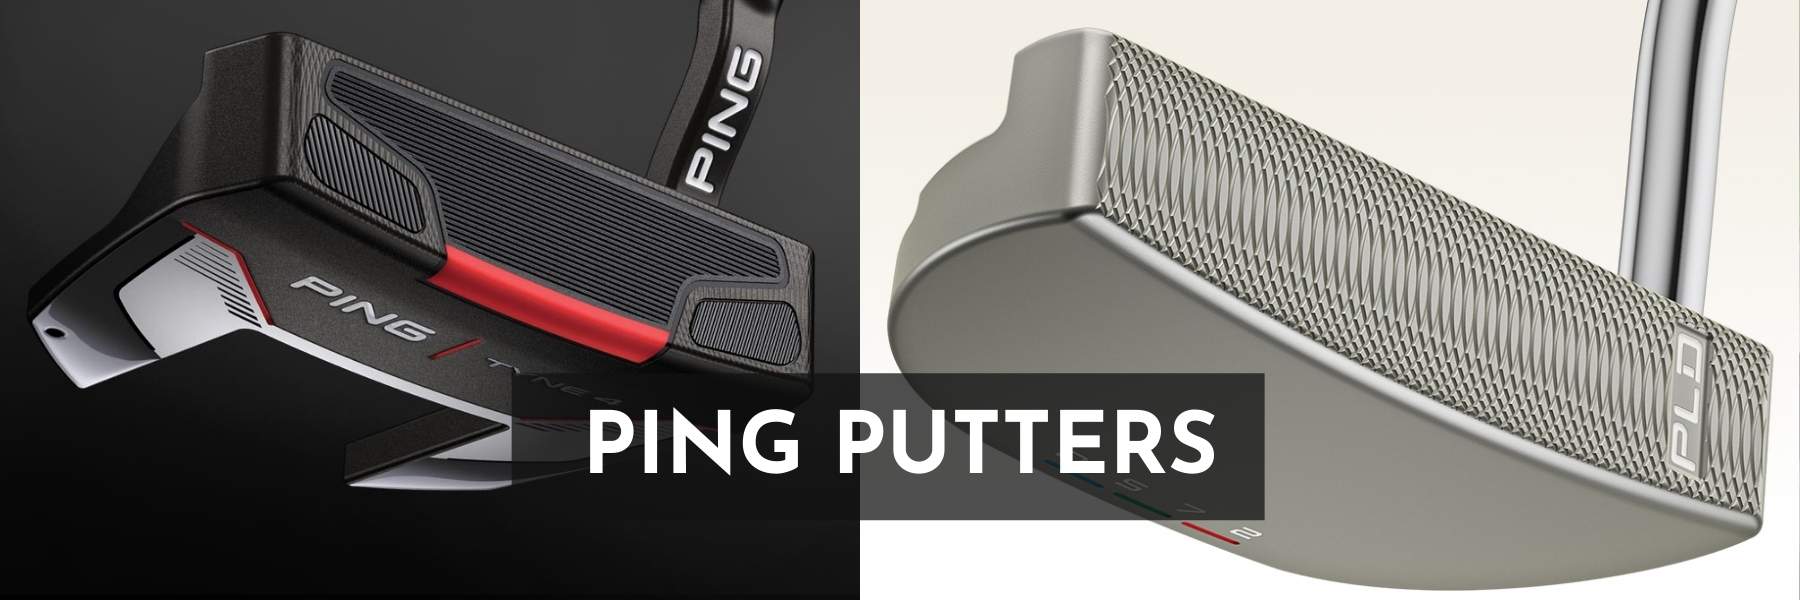 Ping Putters Header